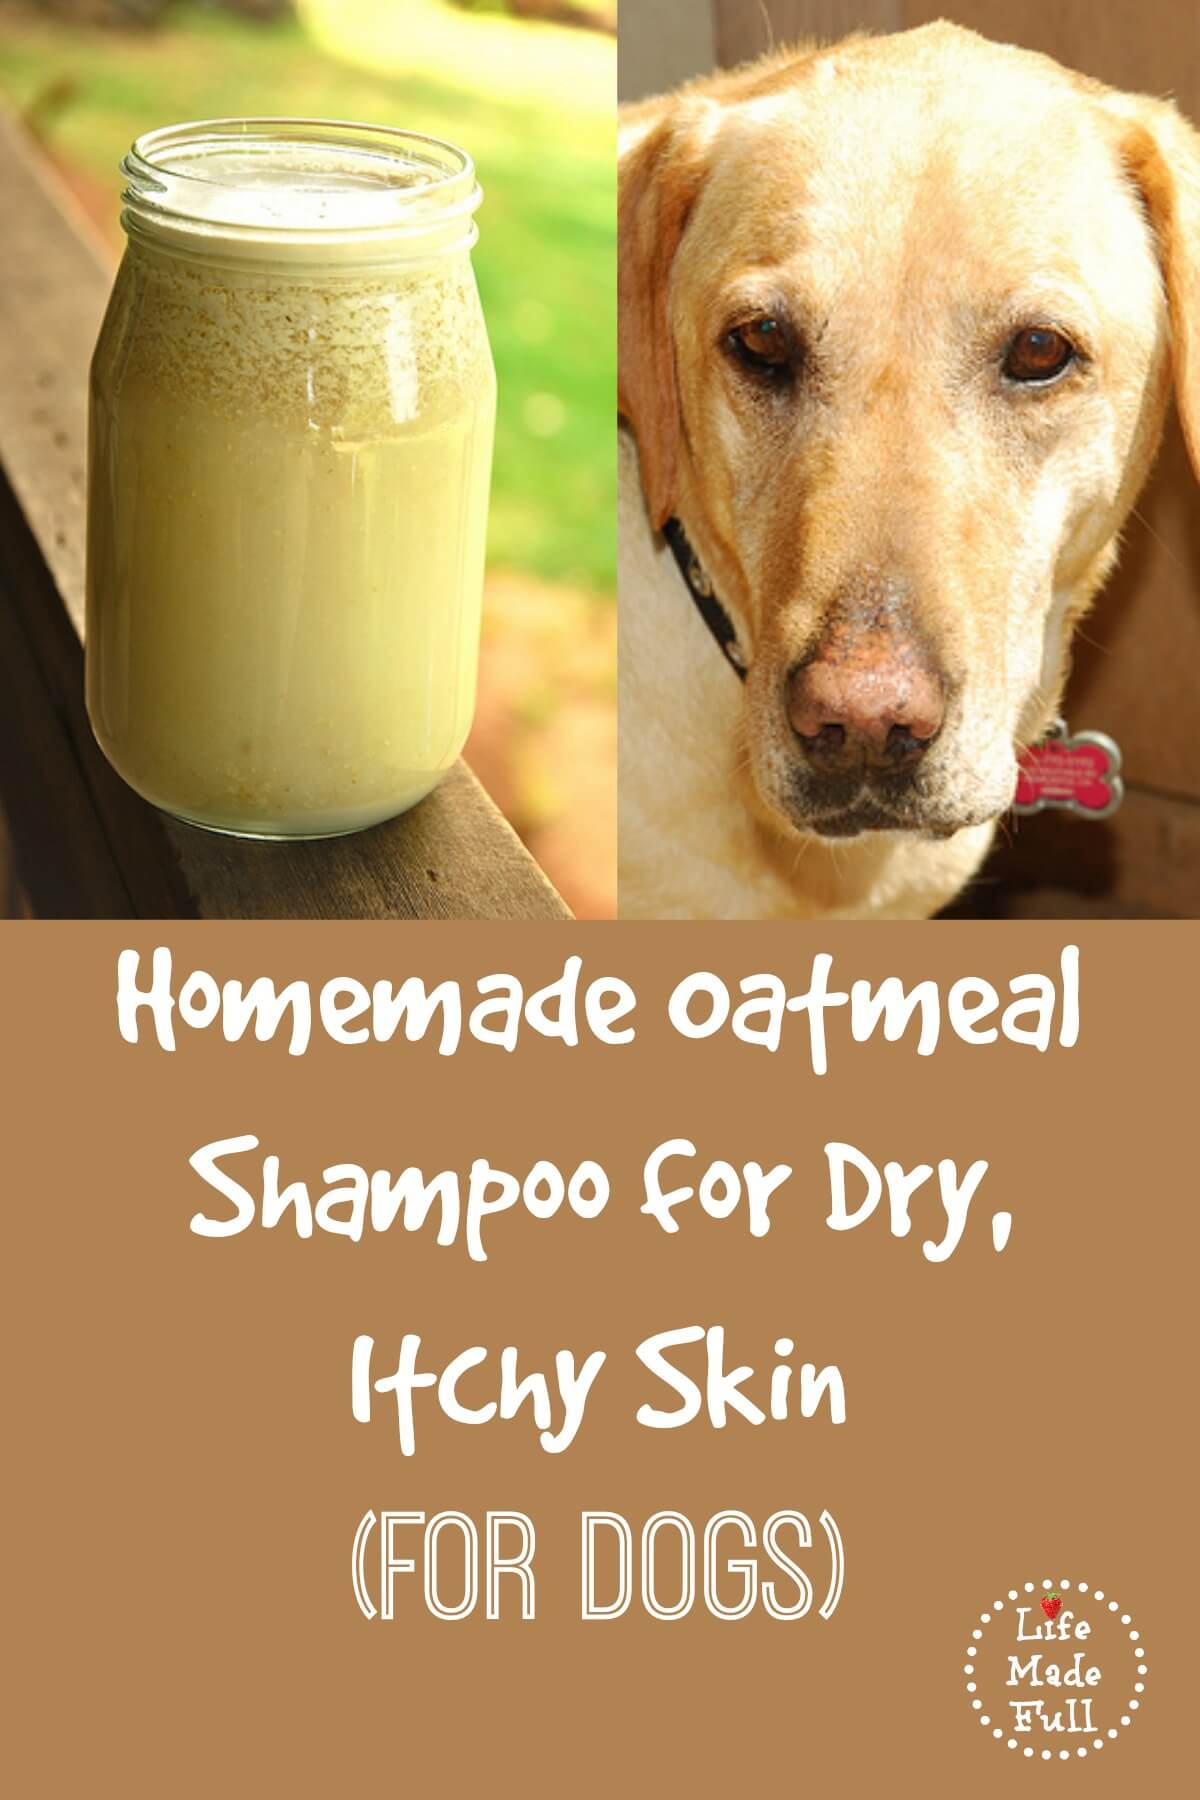 Homemade Shampoo for Dogs (for dry, itchy skin)